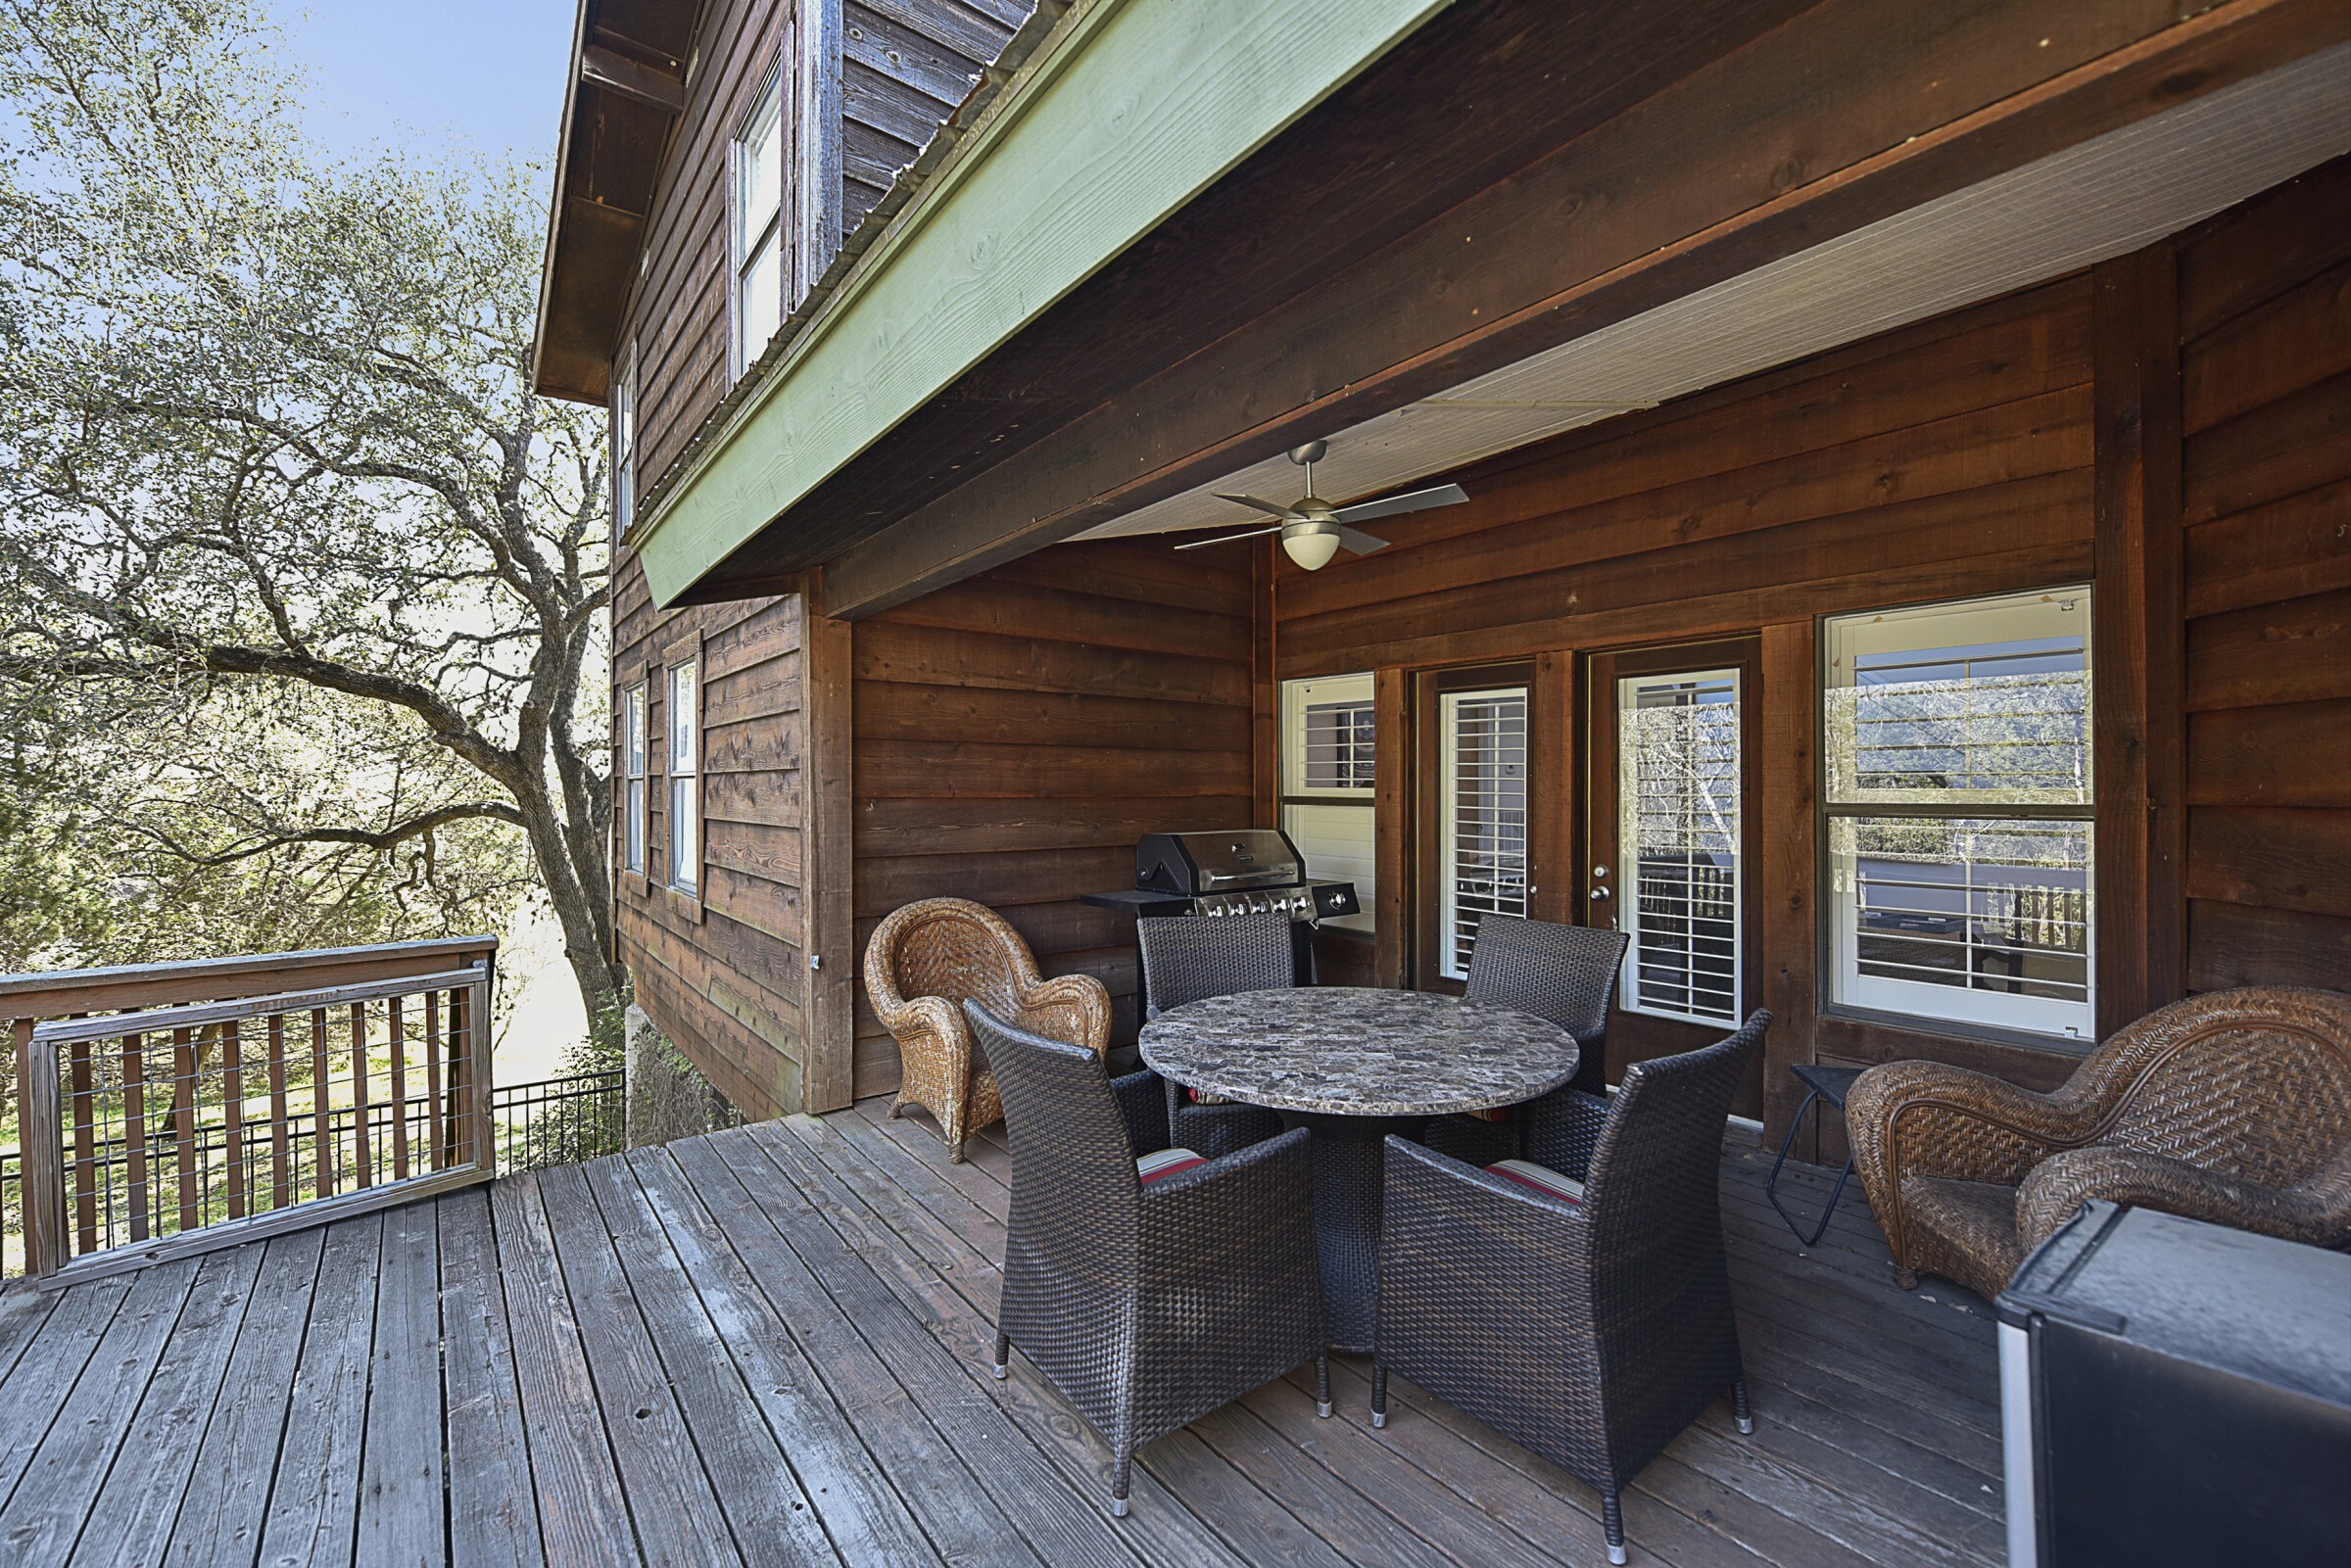 A grill and outdoor dining on the large wooden deck